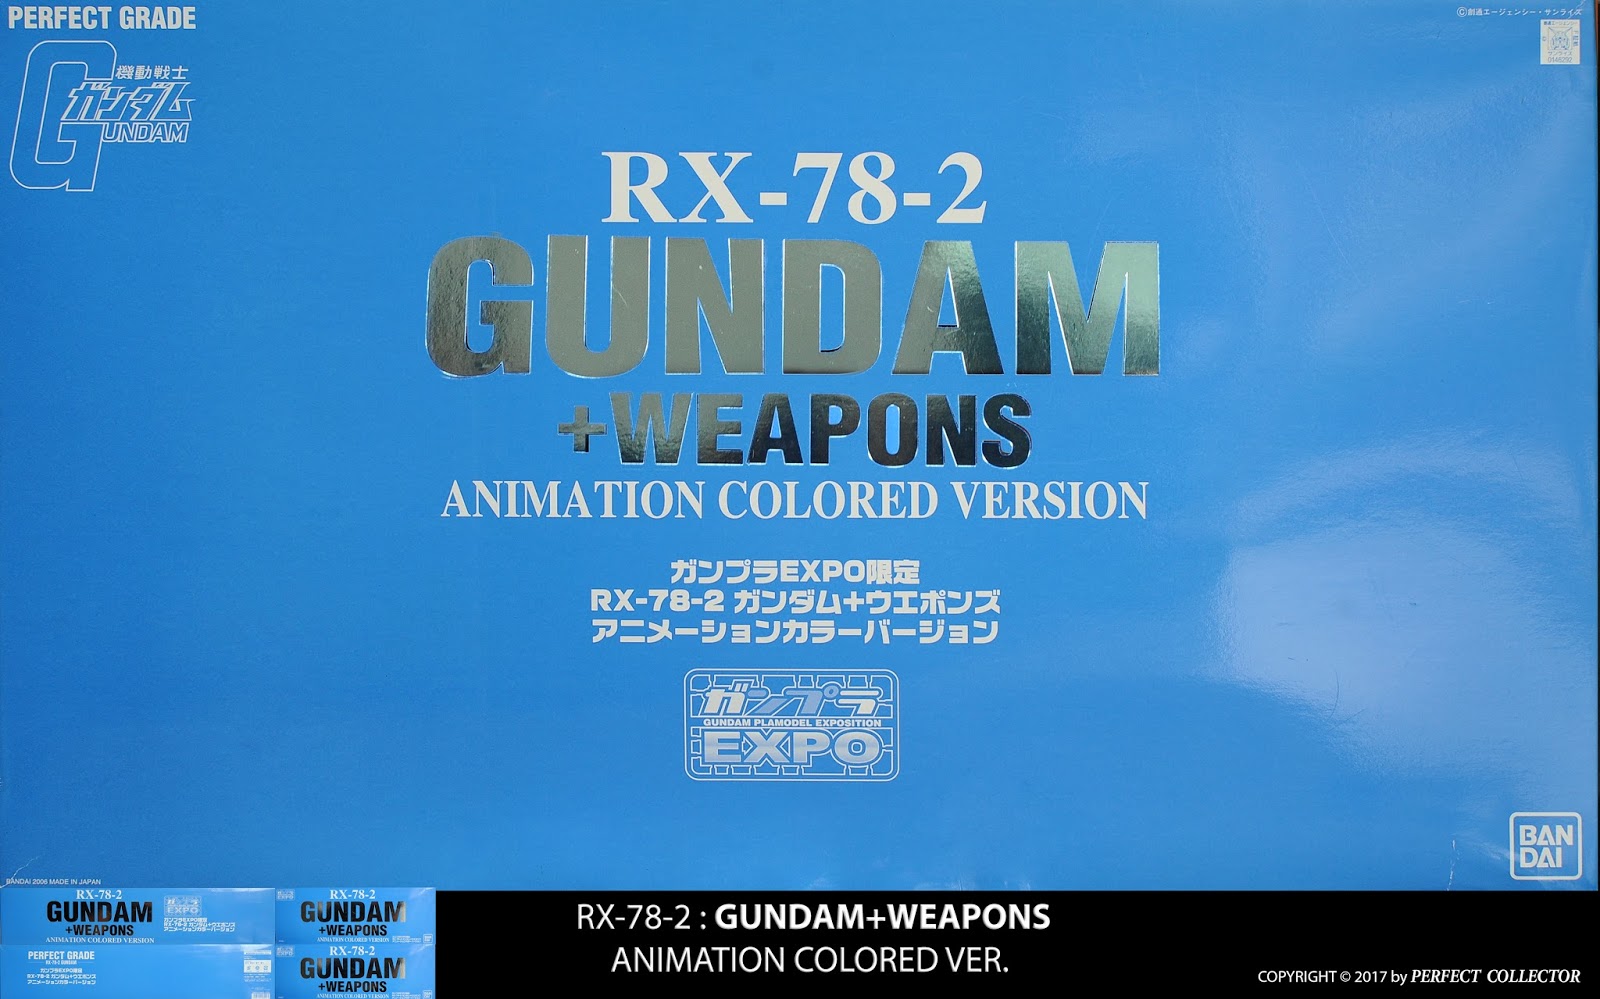 G-リミテッド: Gallery: PG 1/60 RX-78-2 Gundam + Weapons Animation Colored  Version 「Mobile Suit Gundam」 — Limited Edition Gundam Model Kits and Figures